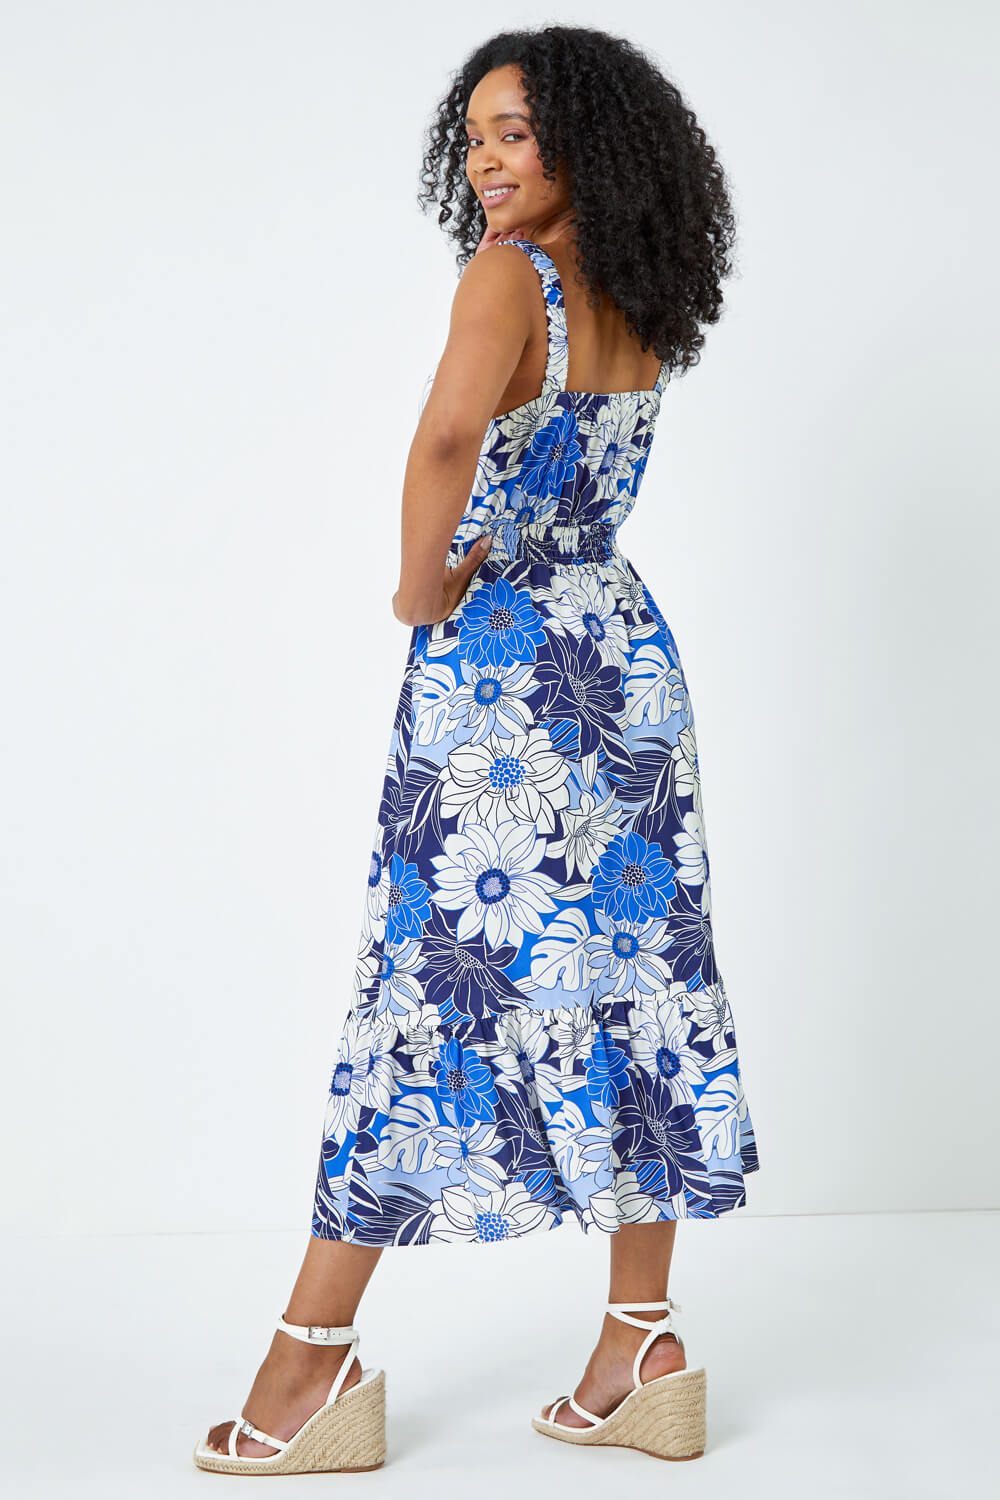 Blue Petite Floral Print Tiered Sundress, Image 3 of 5